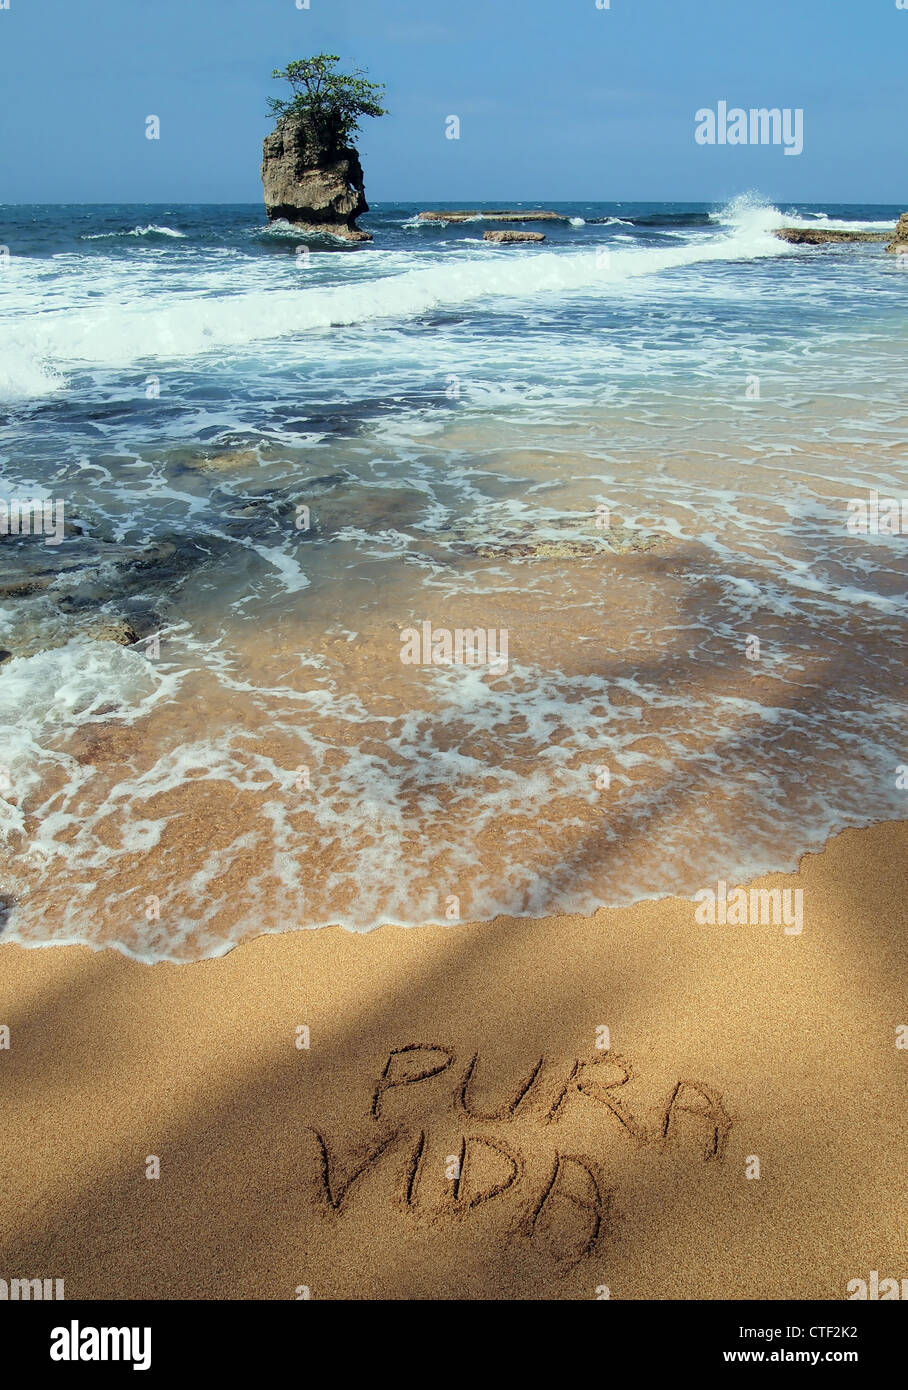 The words 'pura vida' written on the sand on the sea shore of a tropical beach with a rocky islet, Caribbean coast of Costa Rica, Central America Stock Photo